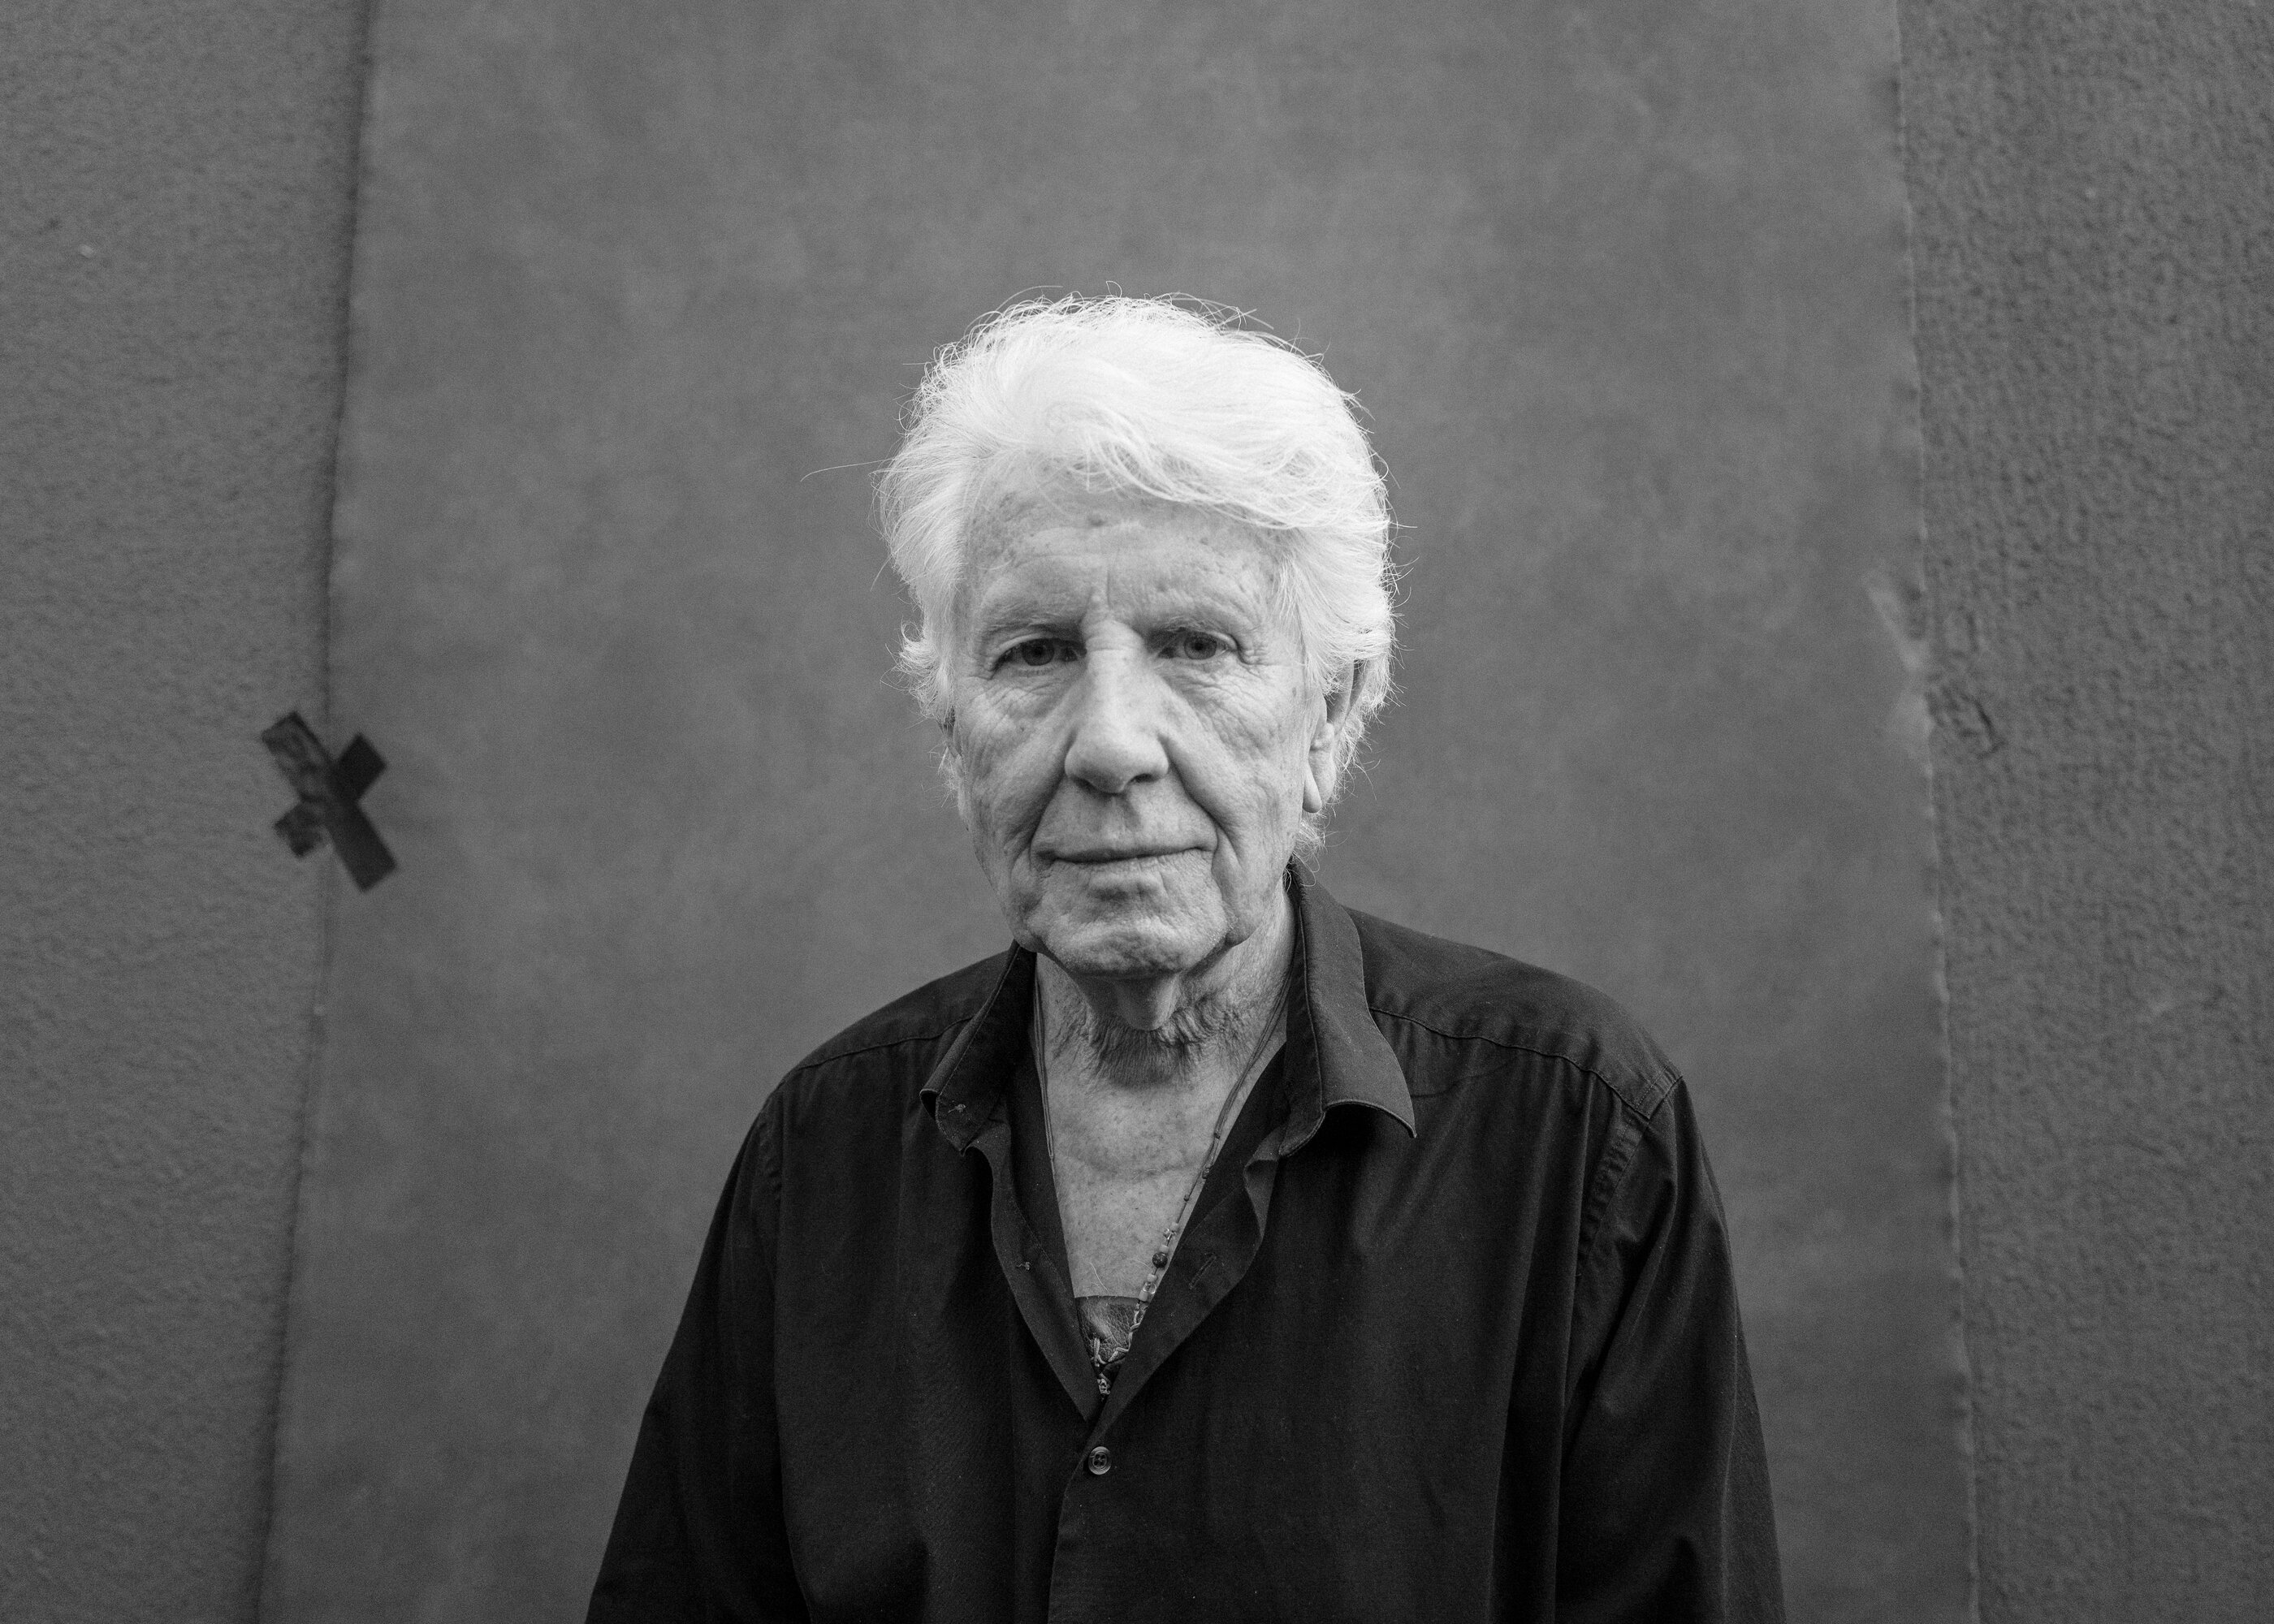 Graham Nash photographed in black and white against a wall.